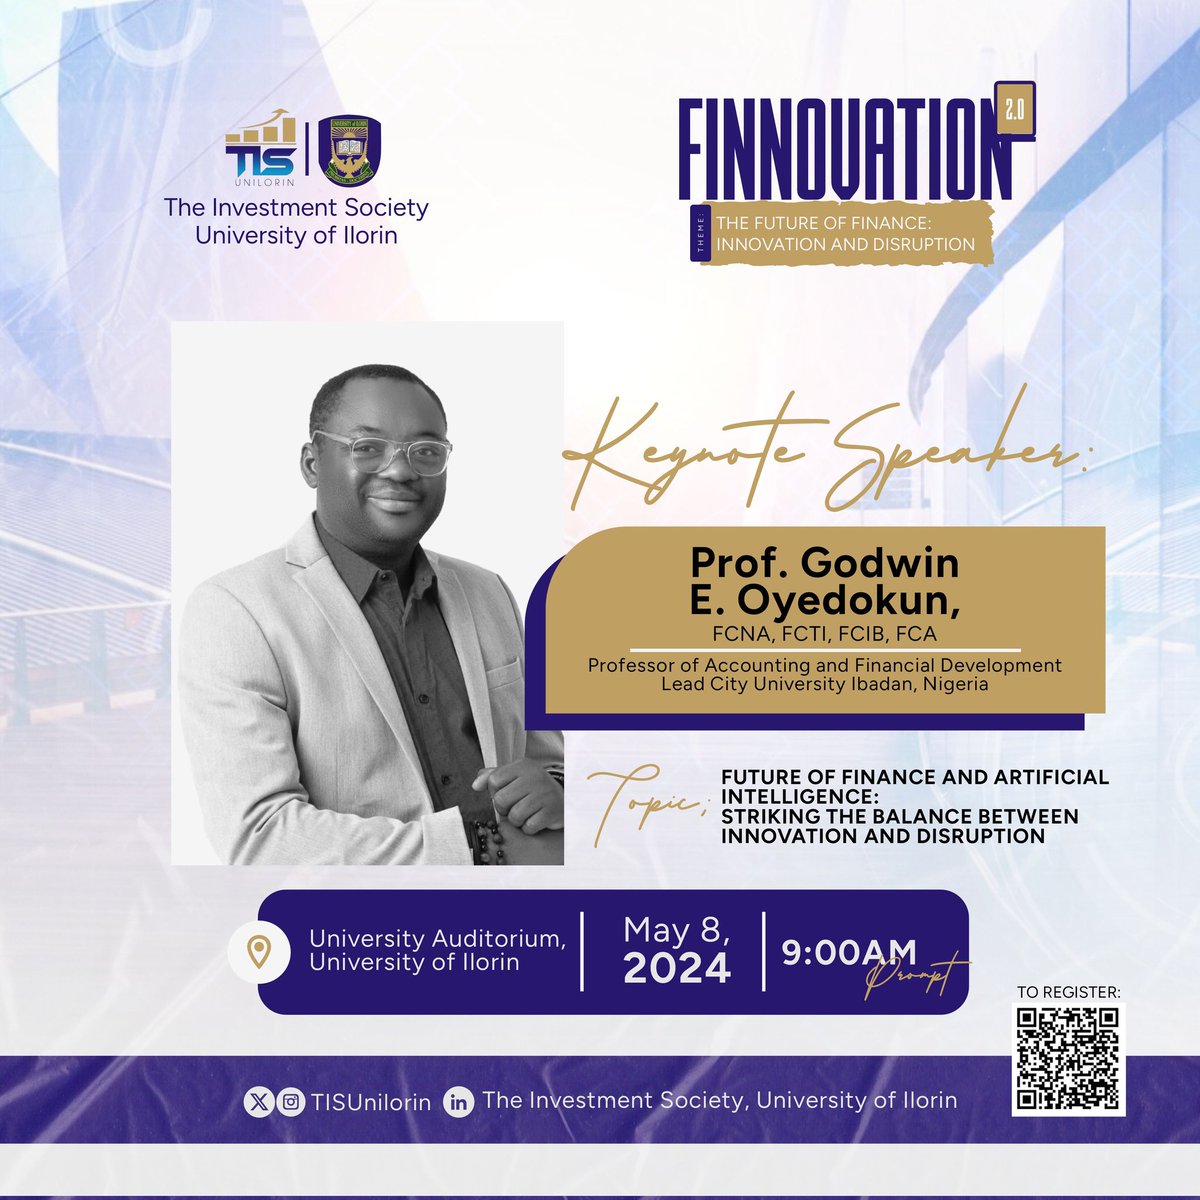 INTRODUCING OUR FIRST KEYNOTE SPEAKER!!

#FINNOVATION